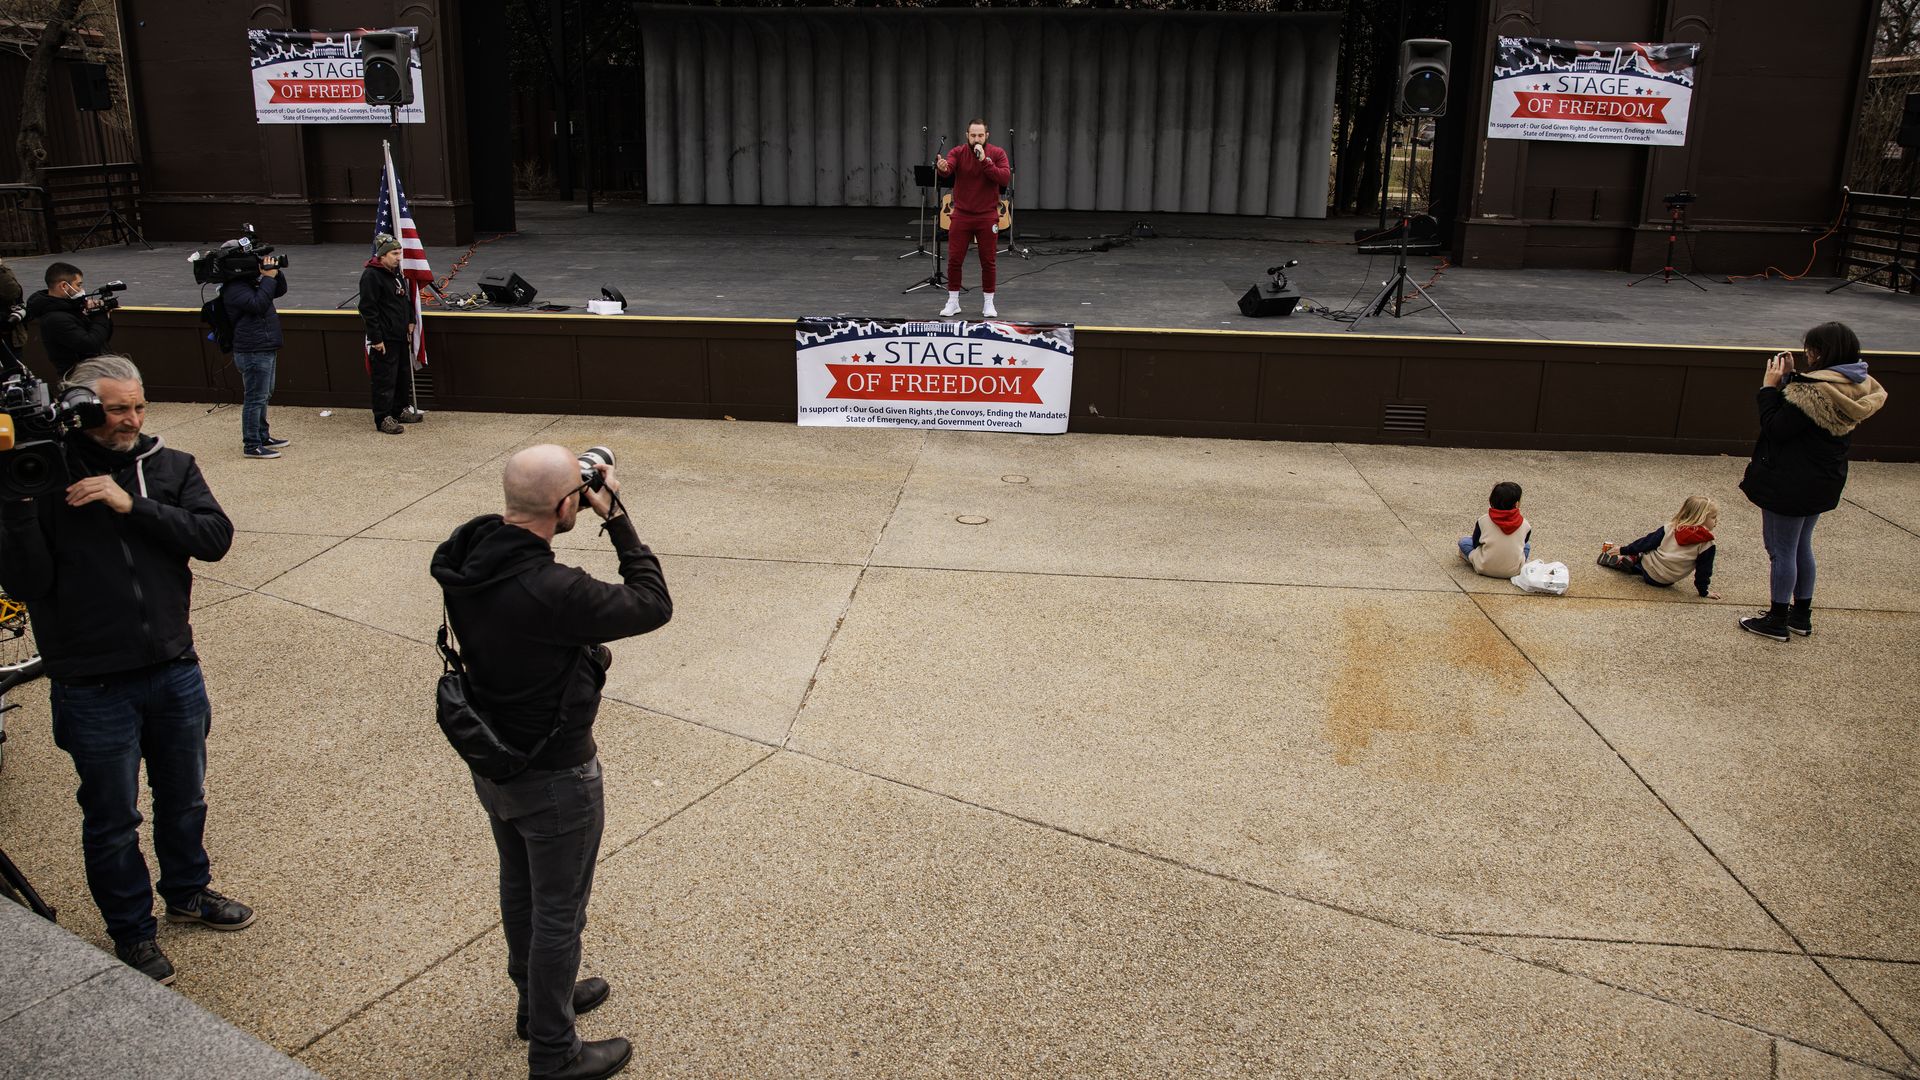 A minuscule crowd is seen at a D.C. rally for truckers protesting vaccine mandates.